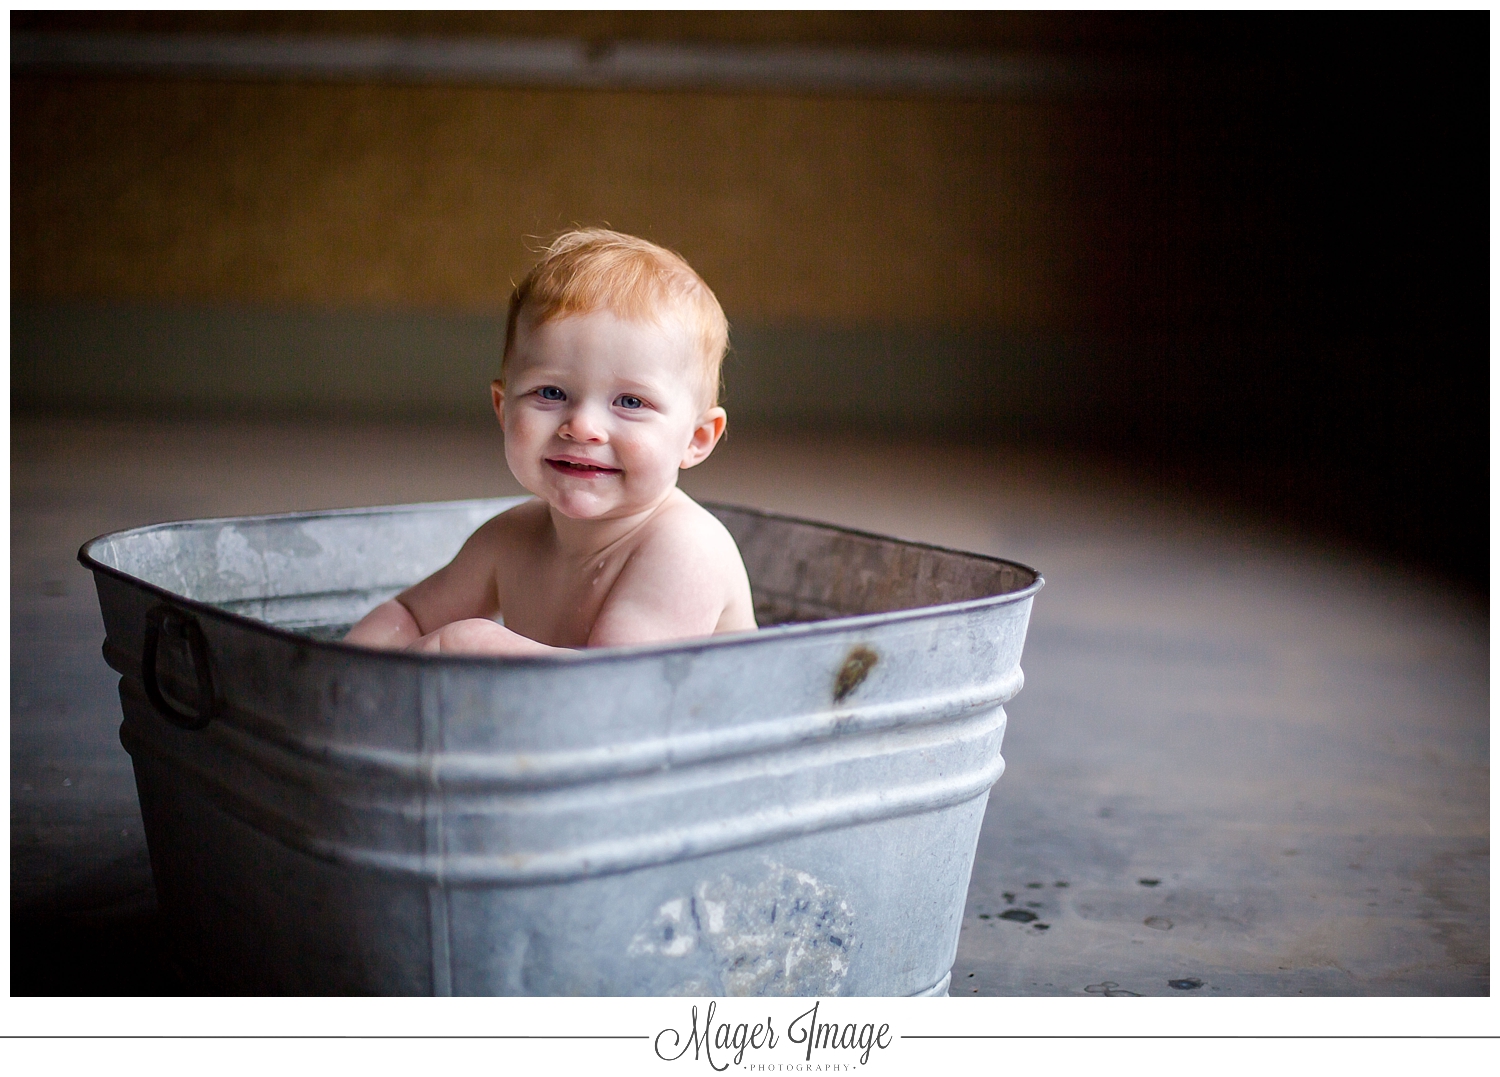 bexley ann mager image photography milk bath personal